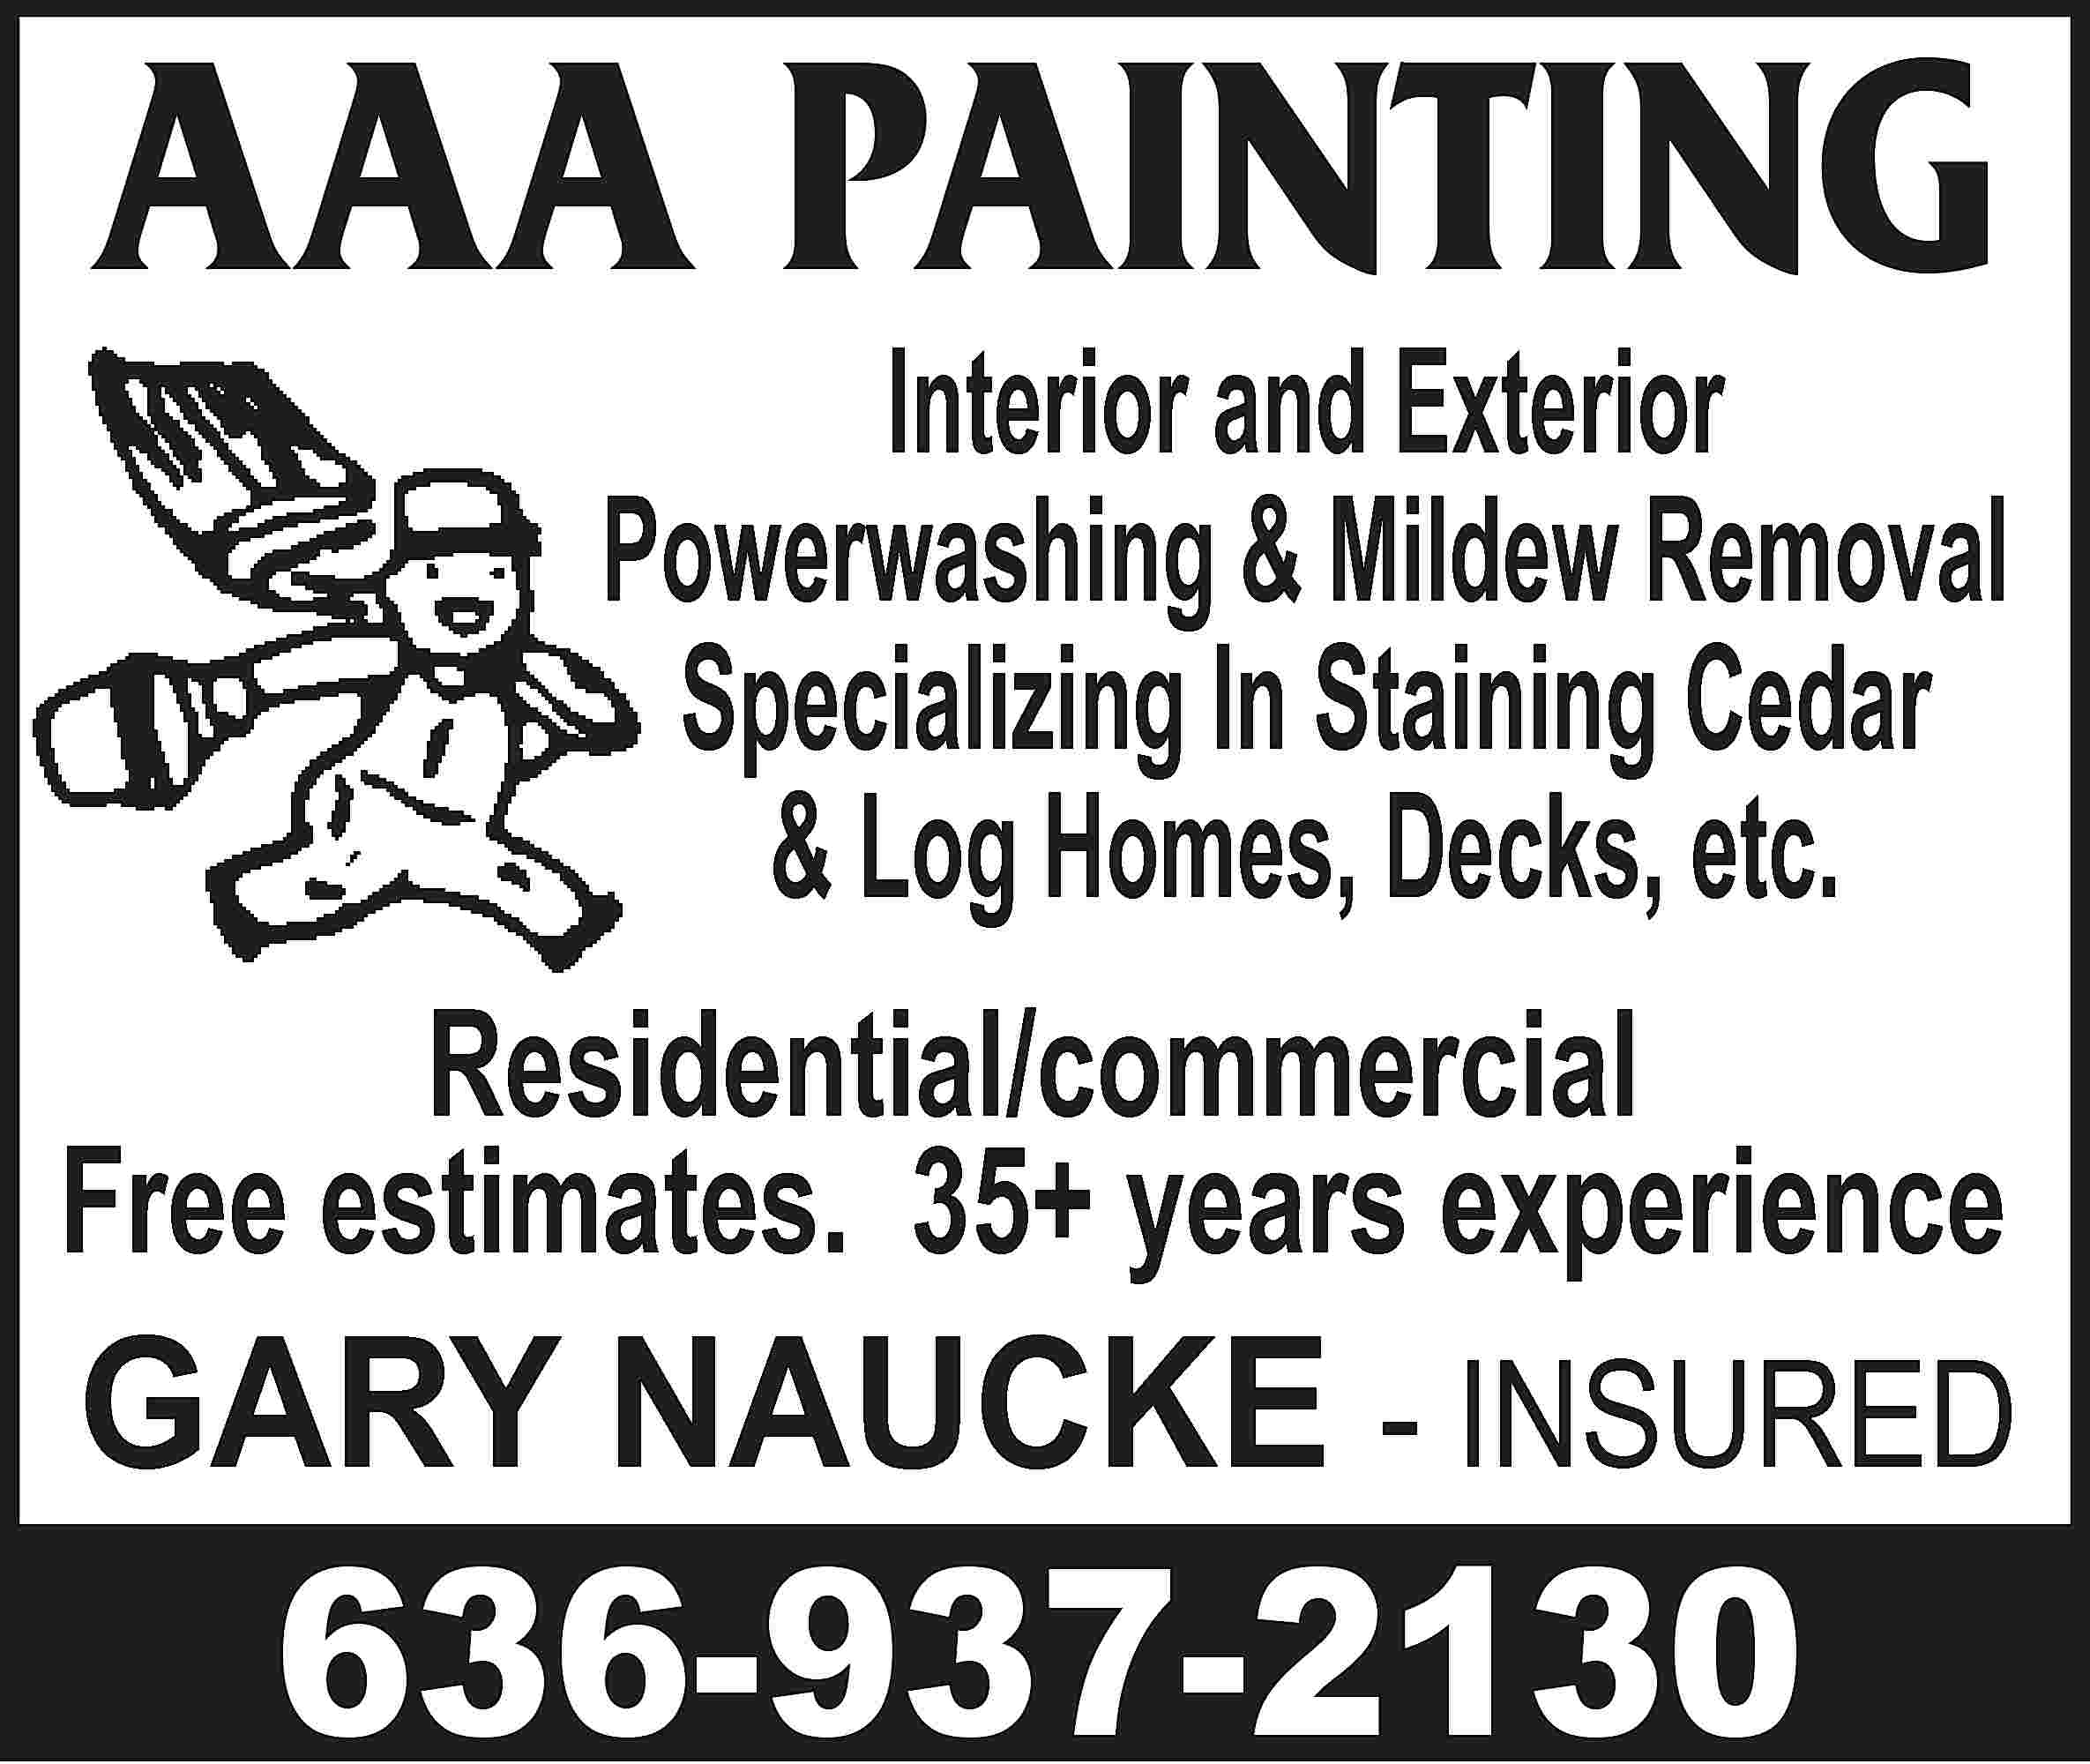 AAA PAINTING Interior and Exterior  AAA PAINTING Interior and Exterior Powerwashing & Mildew Removal Specializing In Staining Cedar & Log Homes, Decks, etc. Residential/commercial Free estimates. 35+ years experience GARY NAUCKE - INSURED 636-937-2130